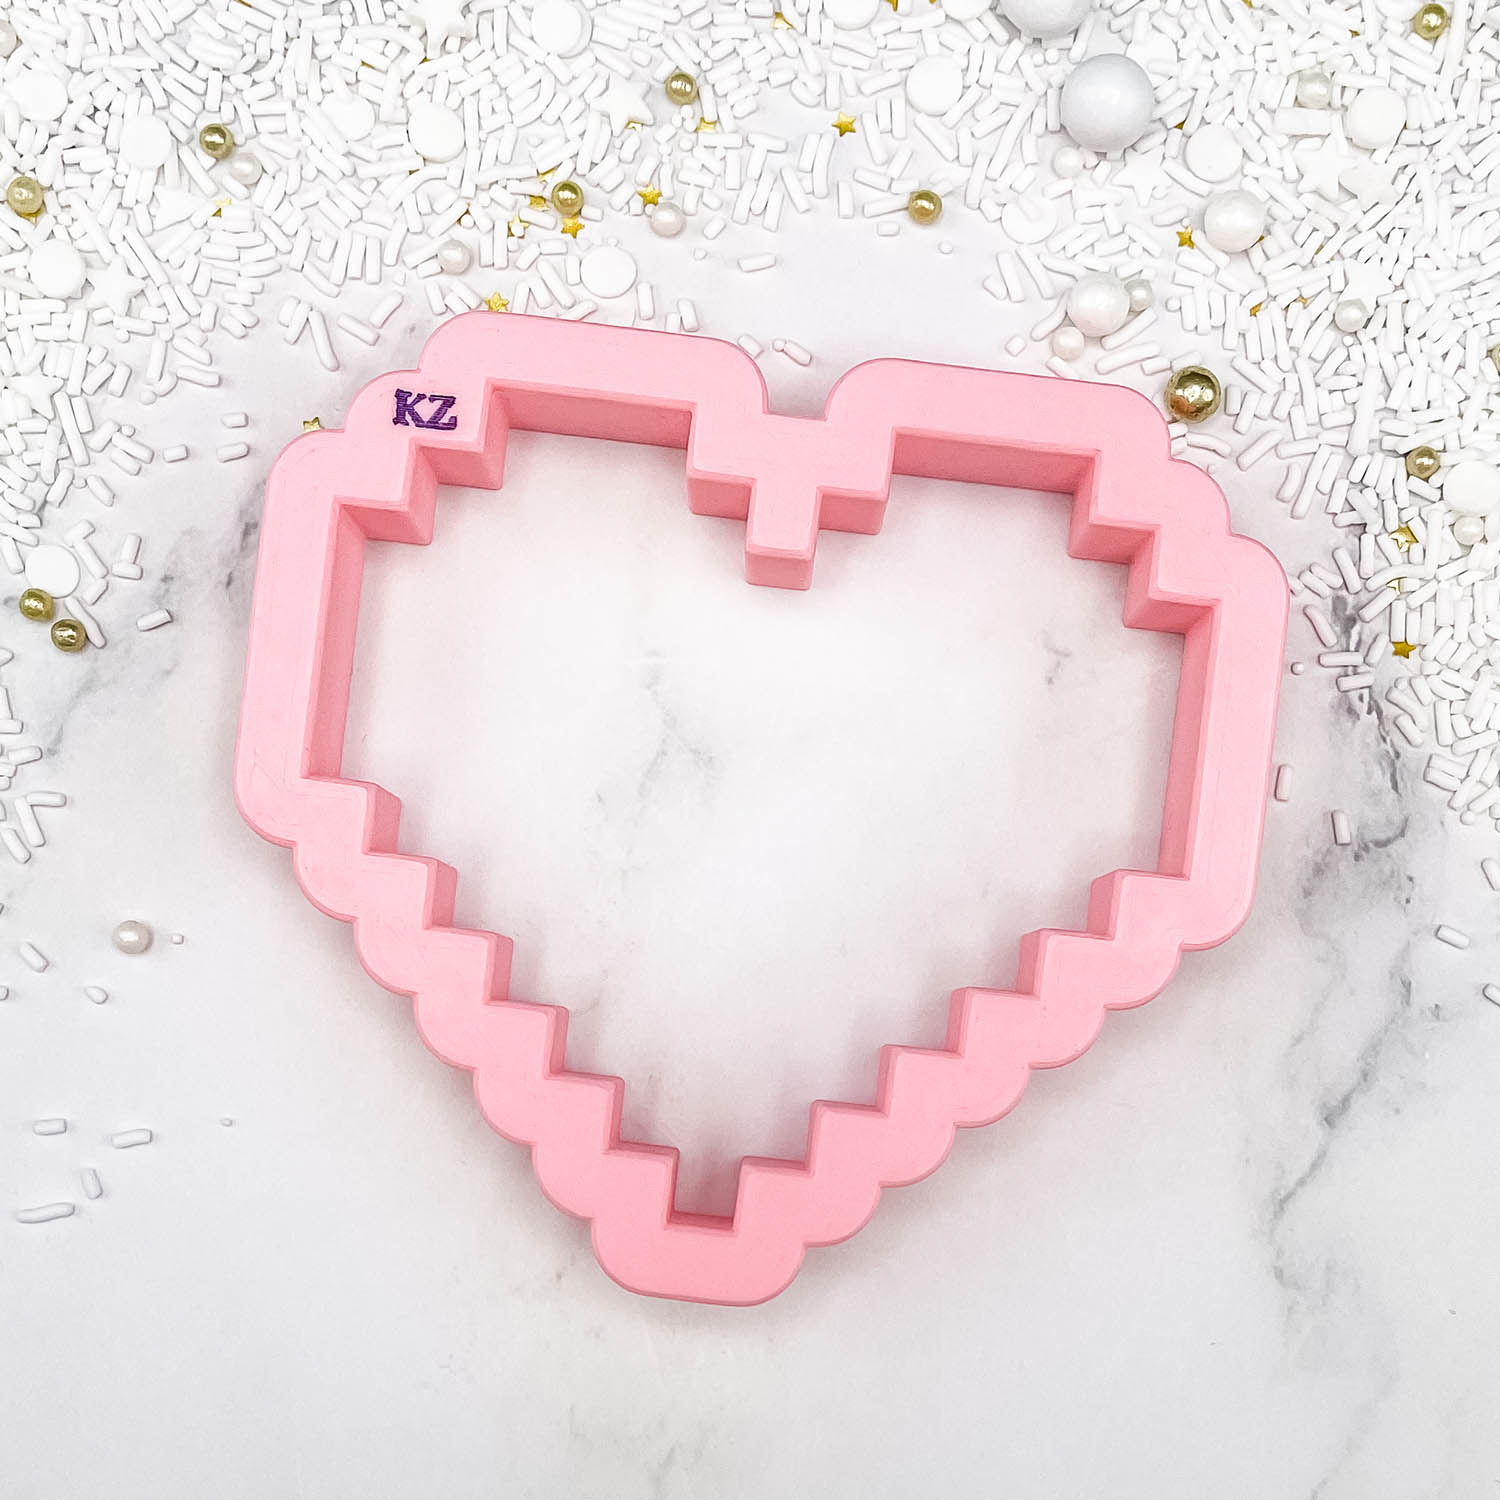 cookie cutter in the shape of a pixelated heart 